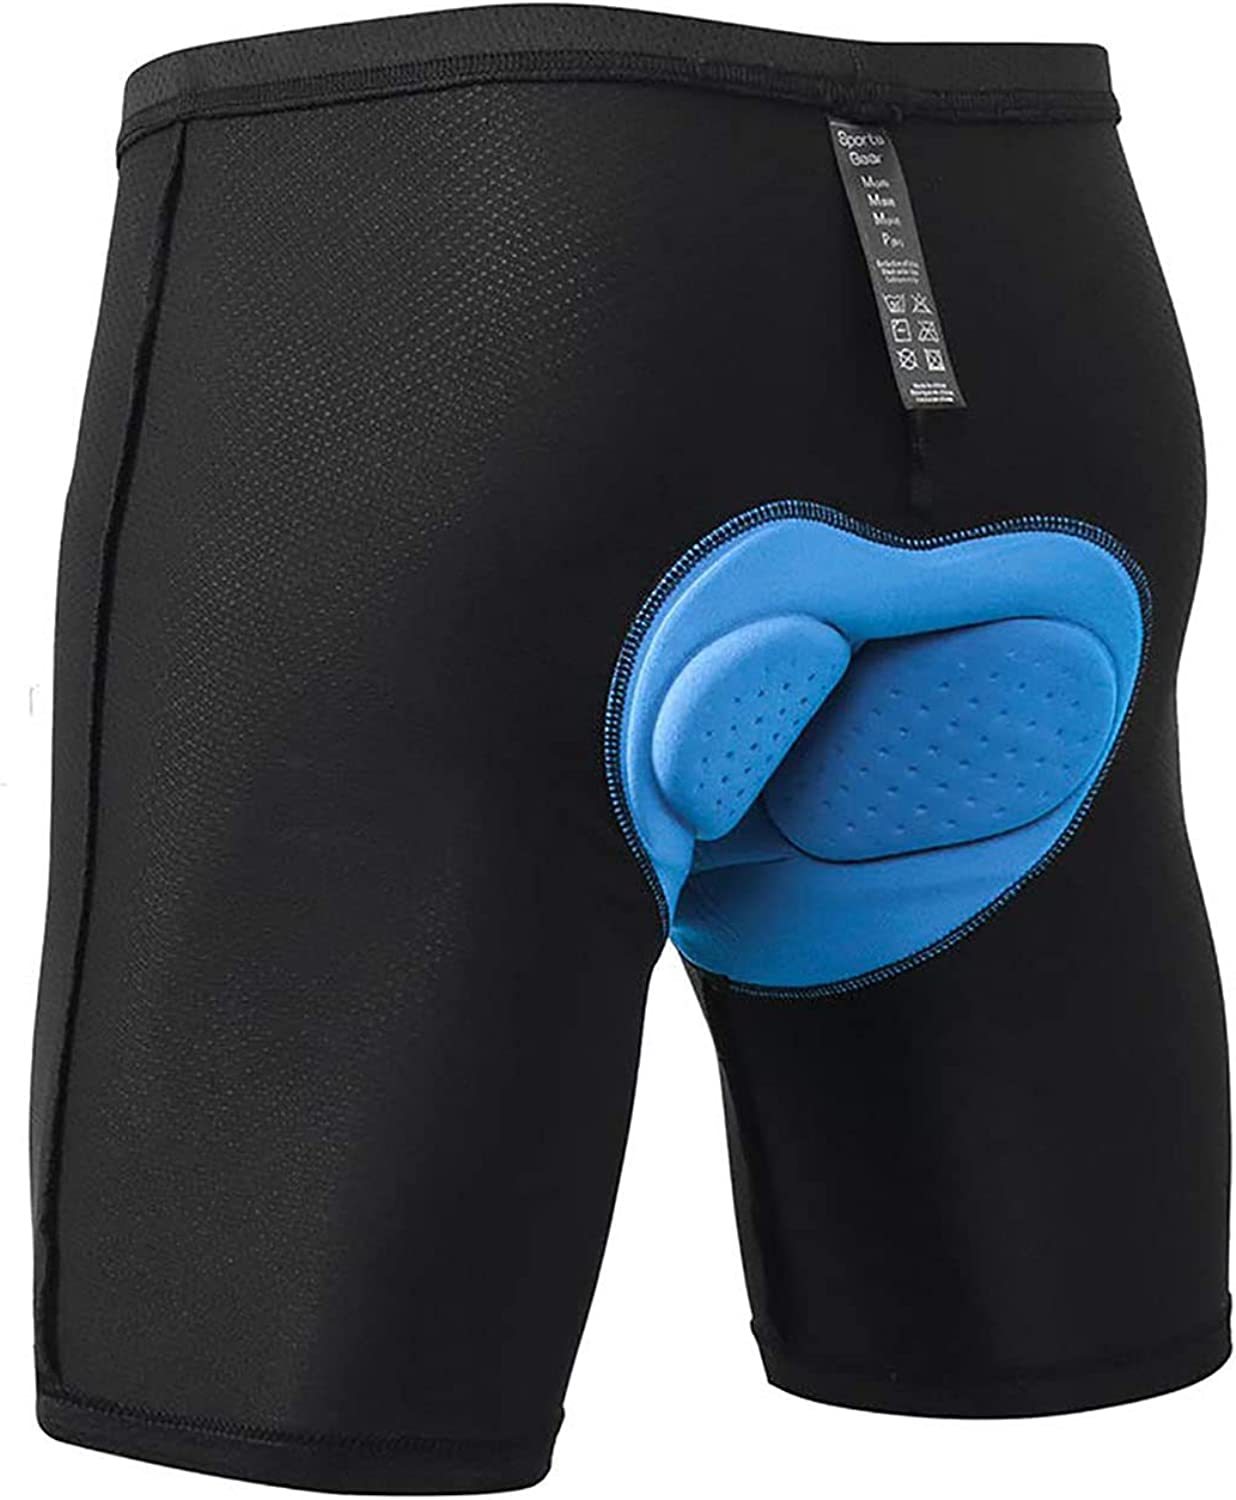 Breathable Cycling Shorts Sponge Padded Shorts Bicycle Underwear Riding  Sports